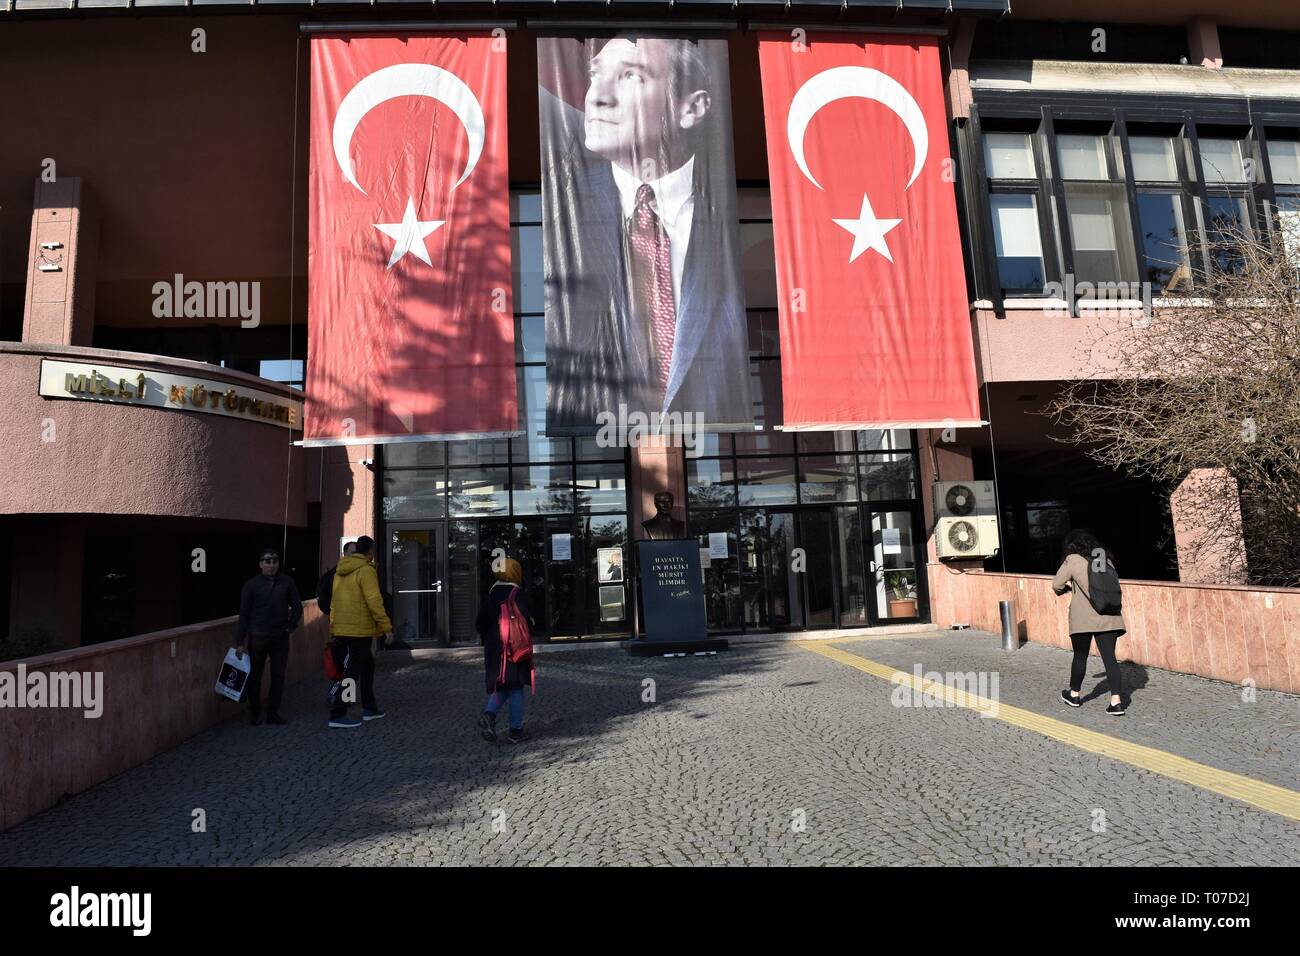 18 March 2019, Turkey, Ankara: People walk towards the National Library building as a portrait of Mustafa Kemal Ataturk, modern Turkey's founding president, and Turkish national flags are hanged on the occasion of the 104th anniversary of the Canakkale Victory. Photo: Altan Gocher | usage worldwide Stock Photo